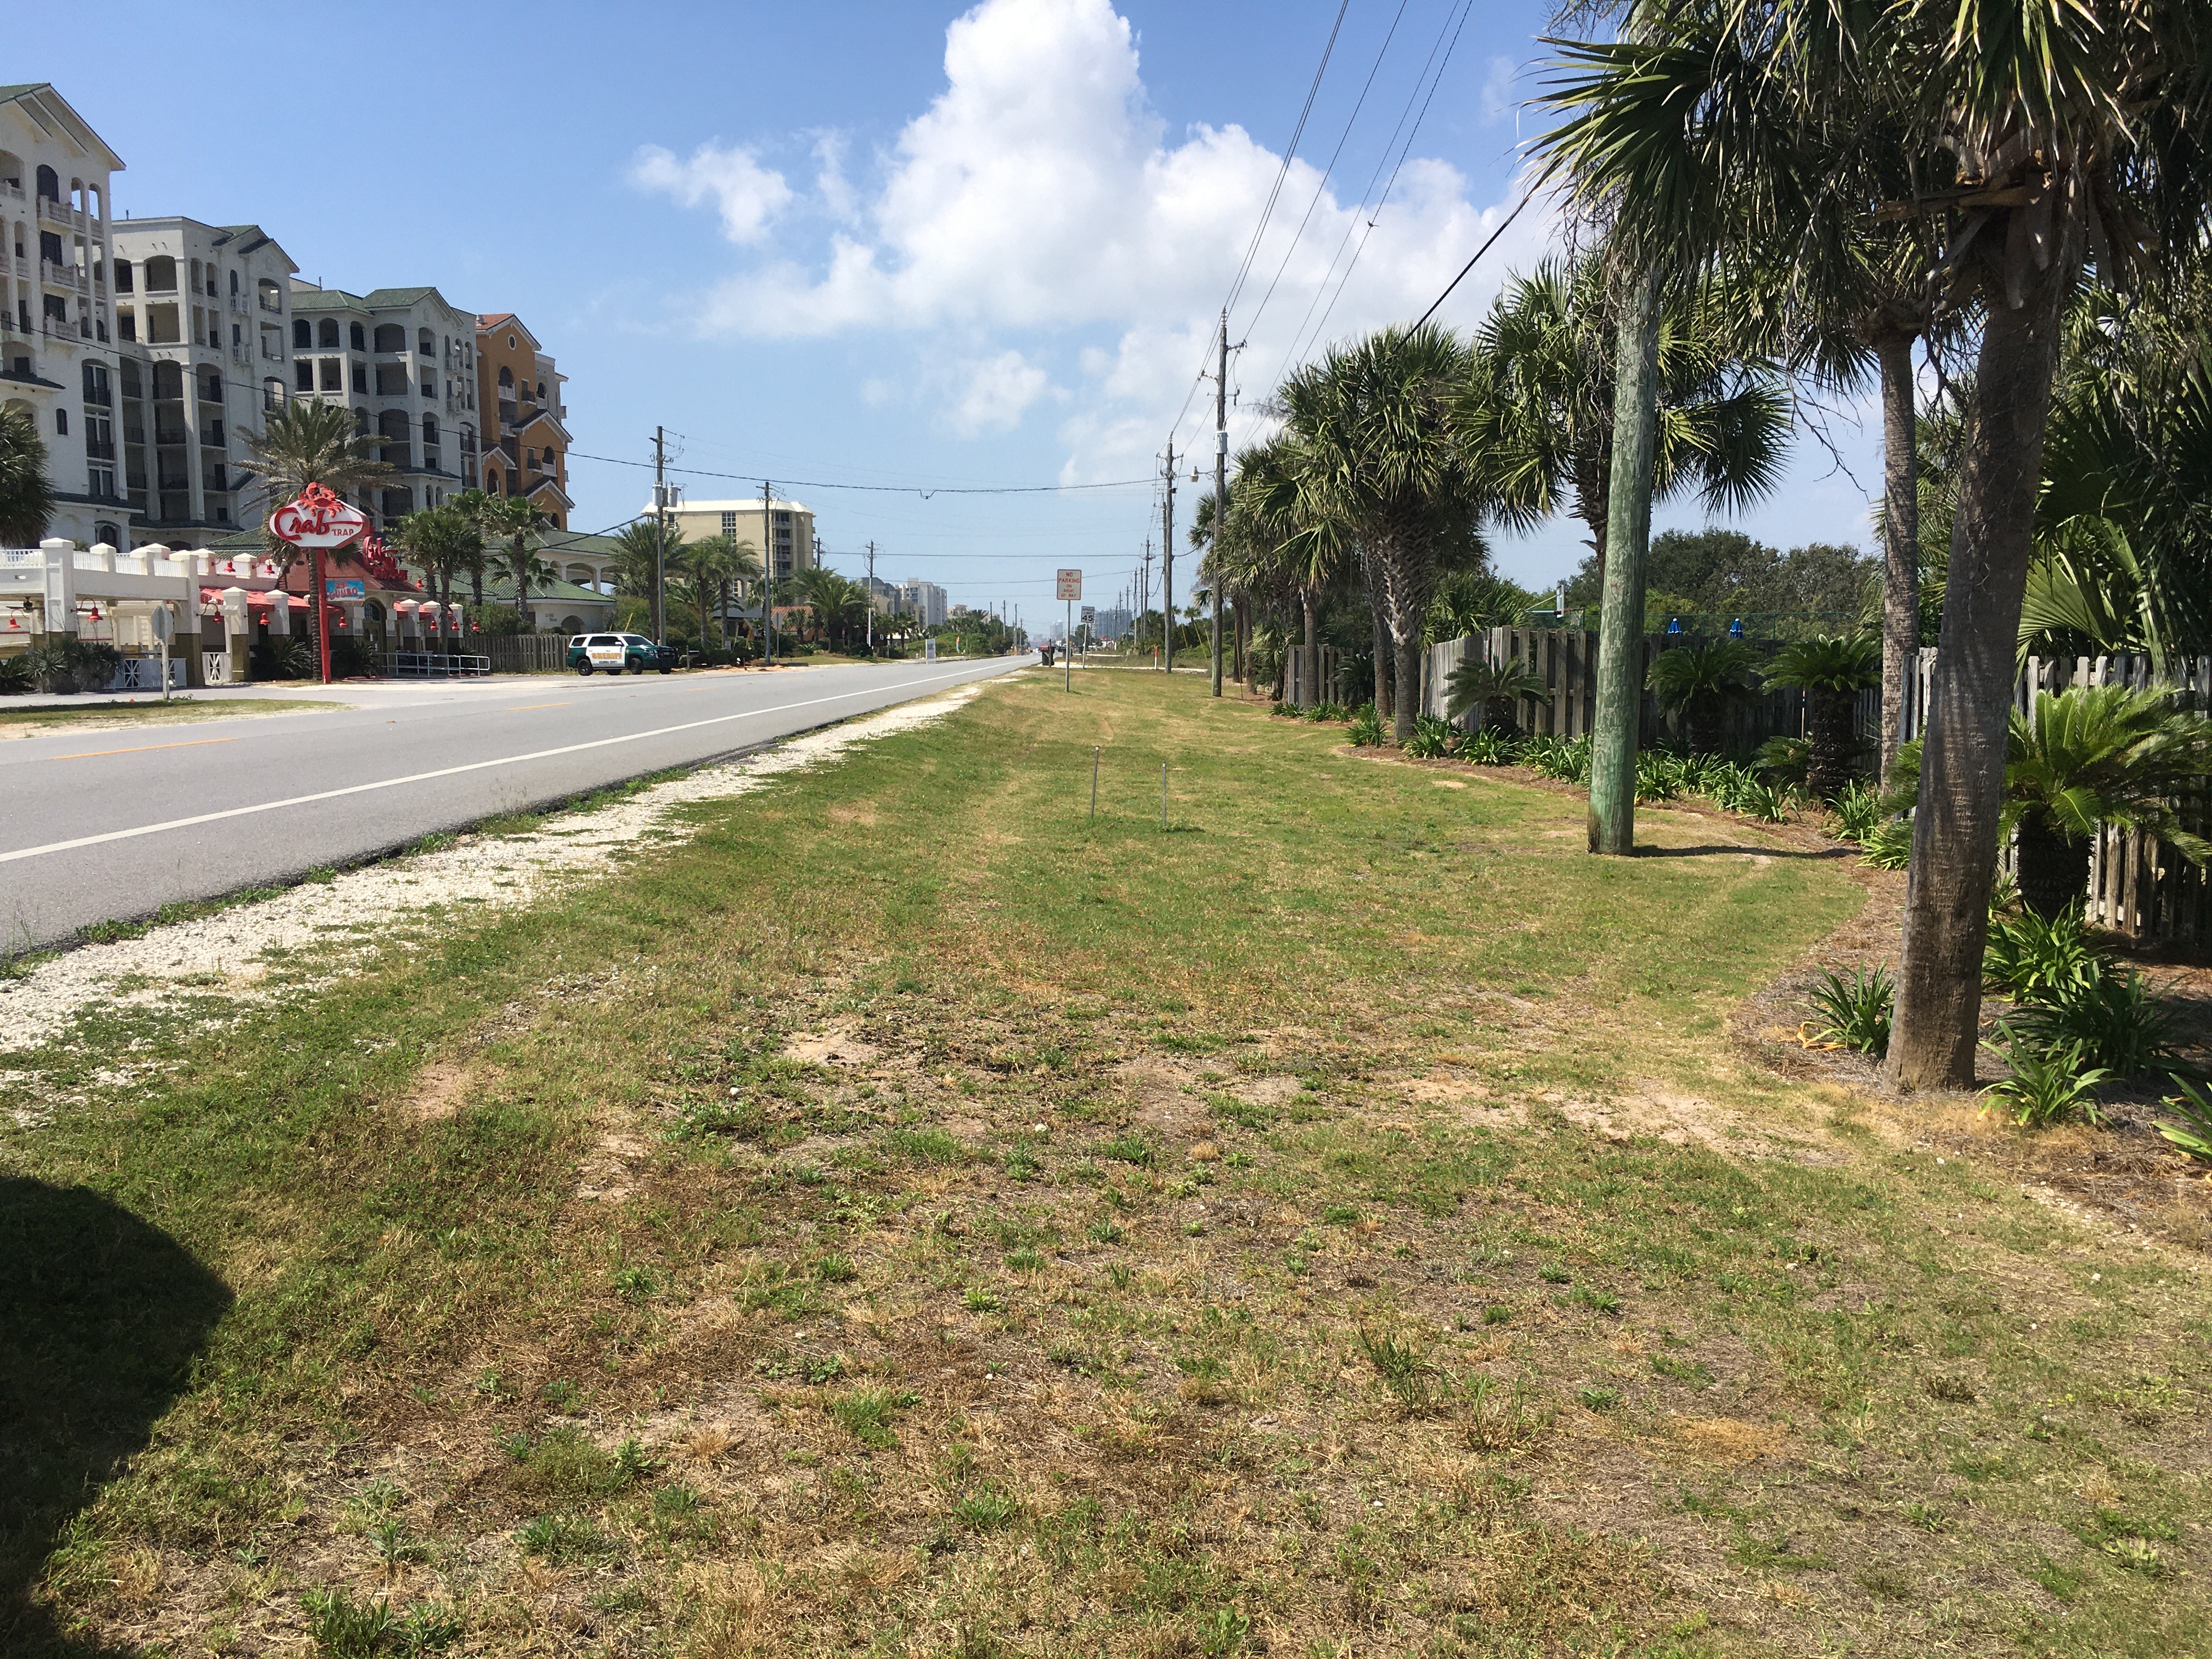 Photo of proposed path site across from Crab Trap